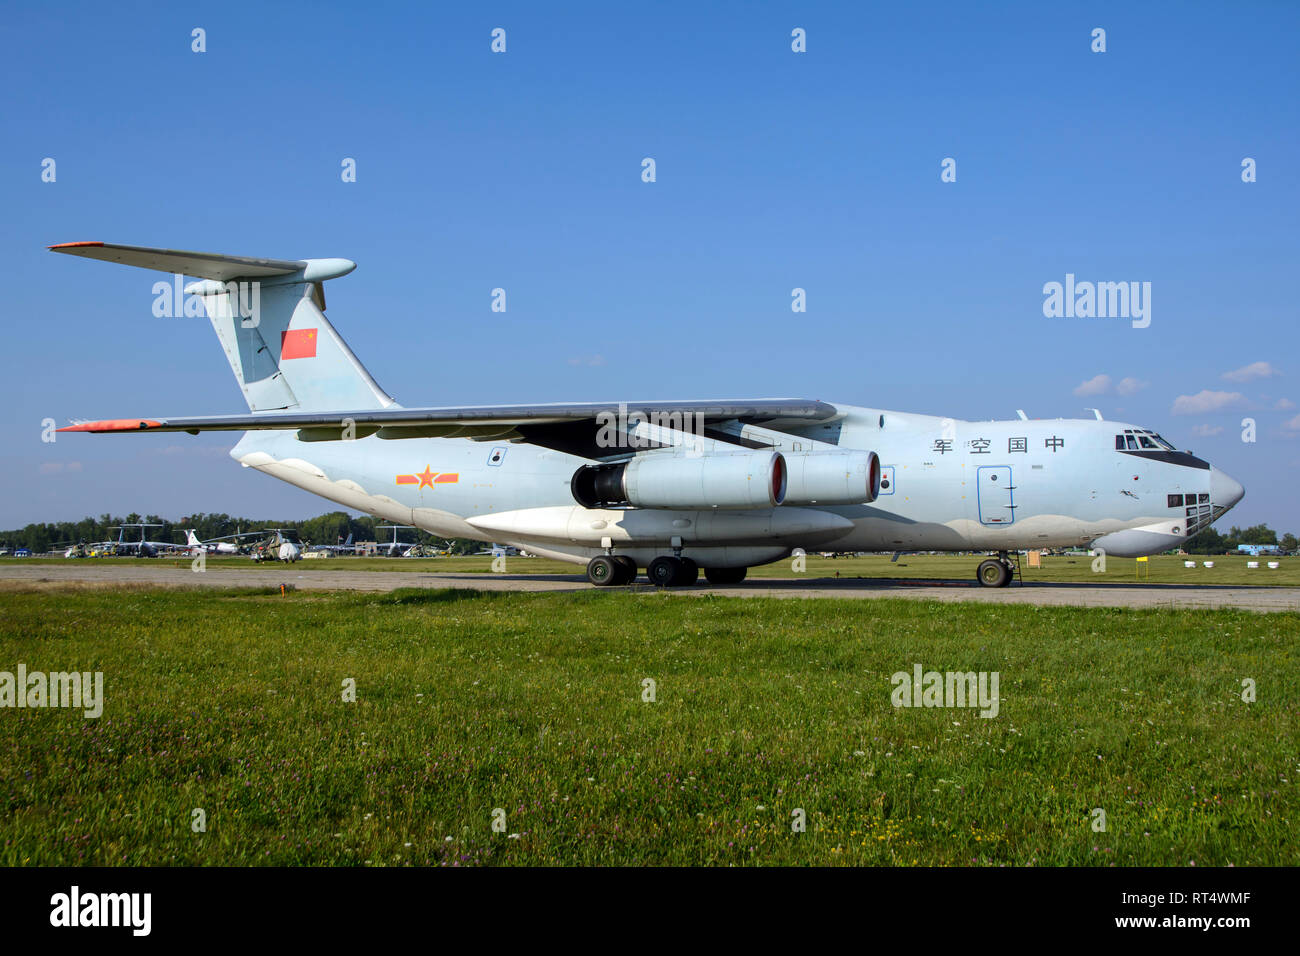 A People's Liberation Army Air Force Il-76TD transport aircraft. Stock Photo